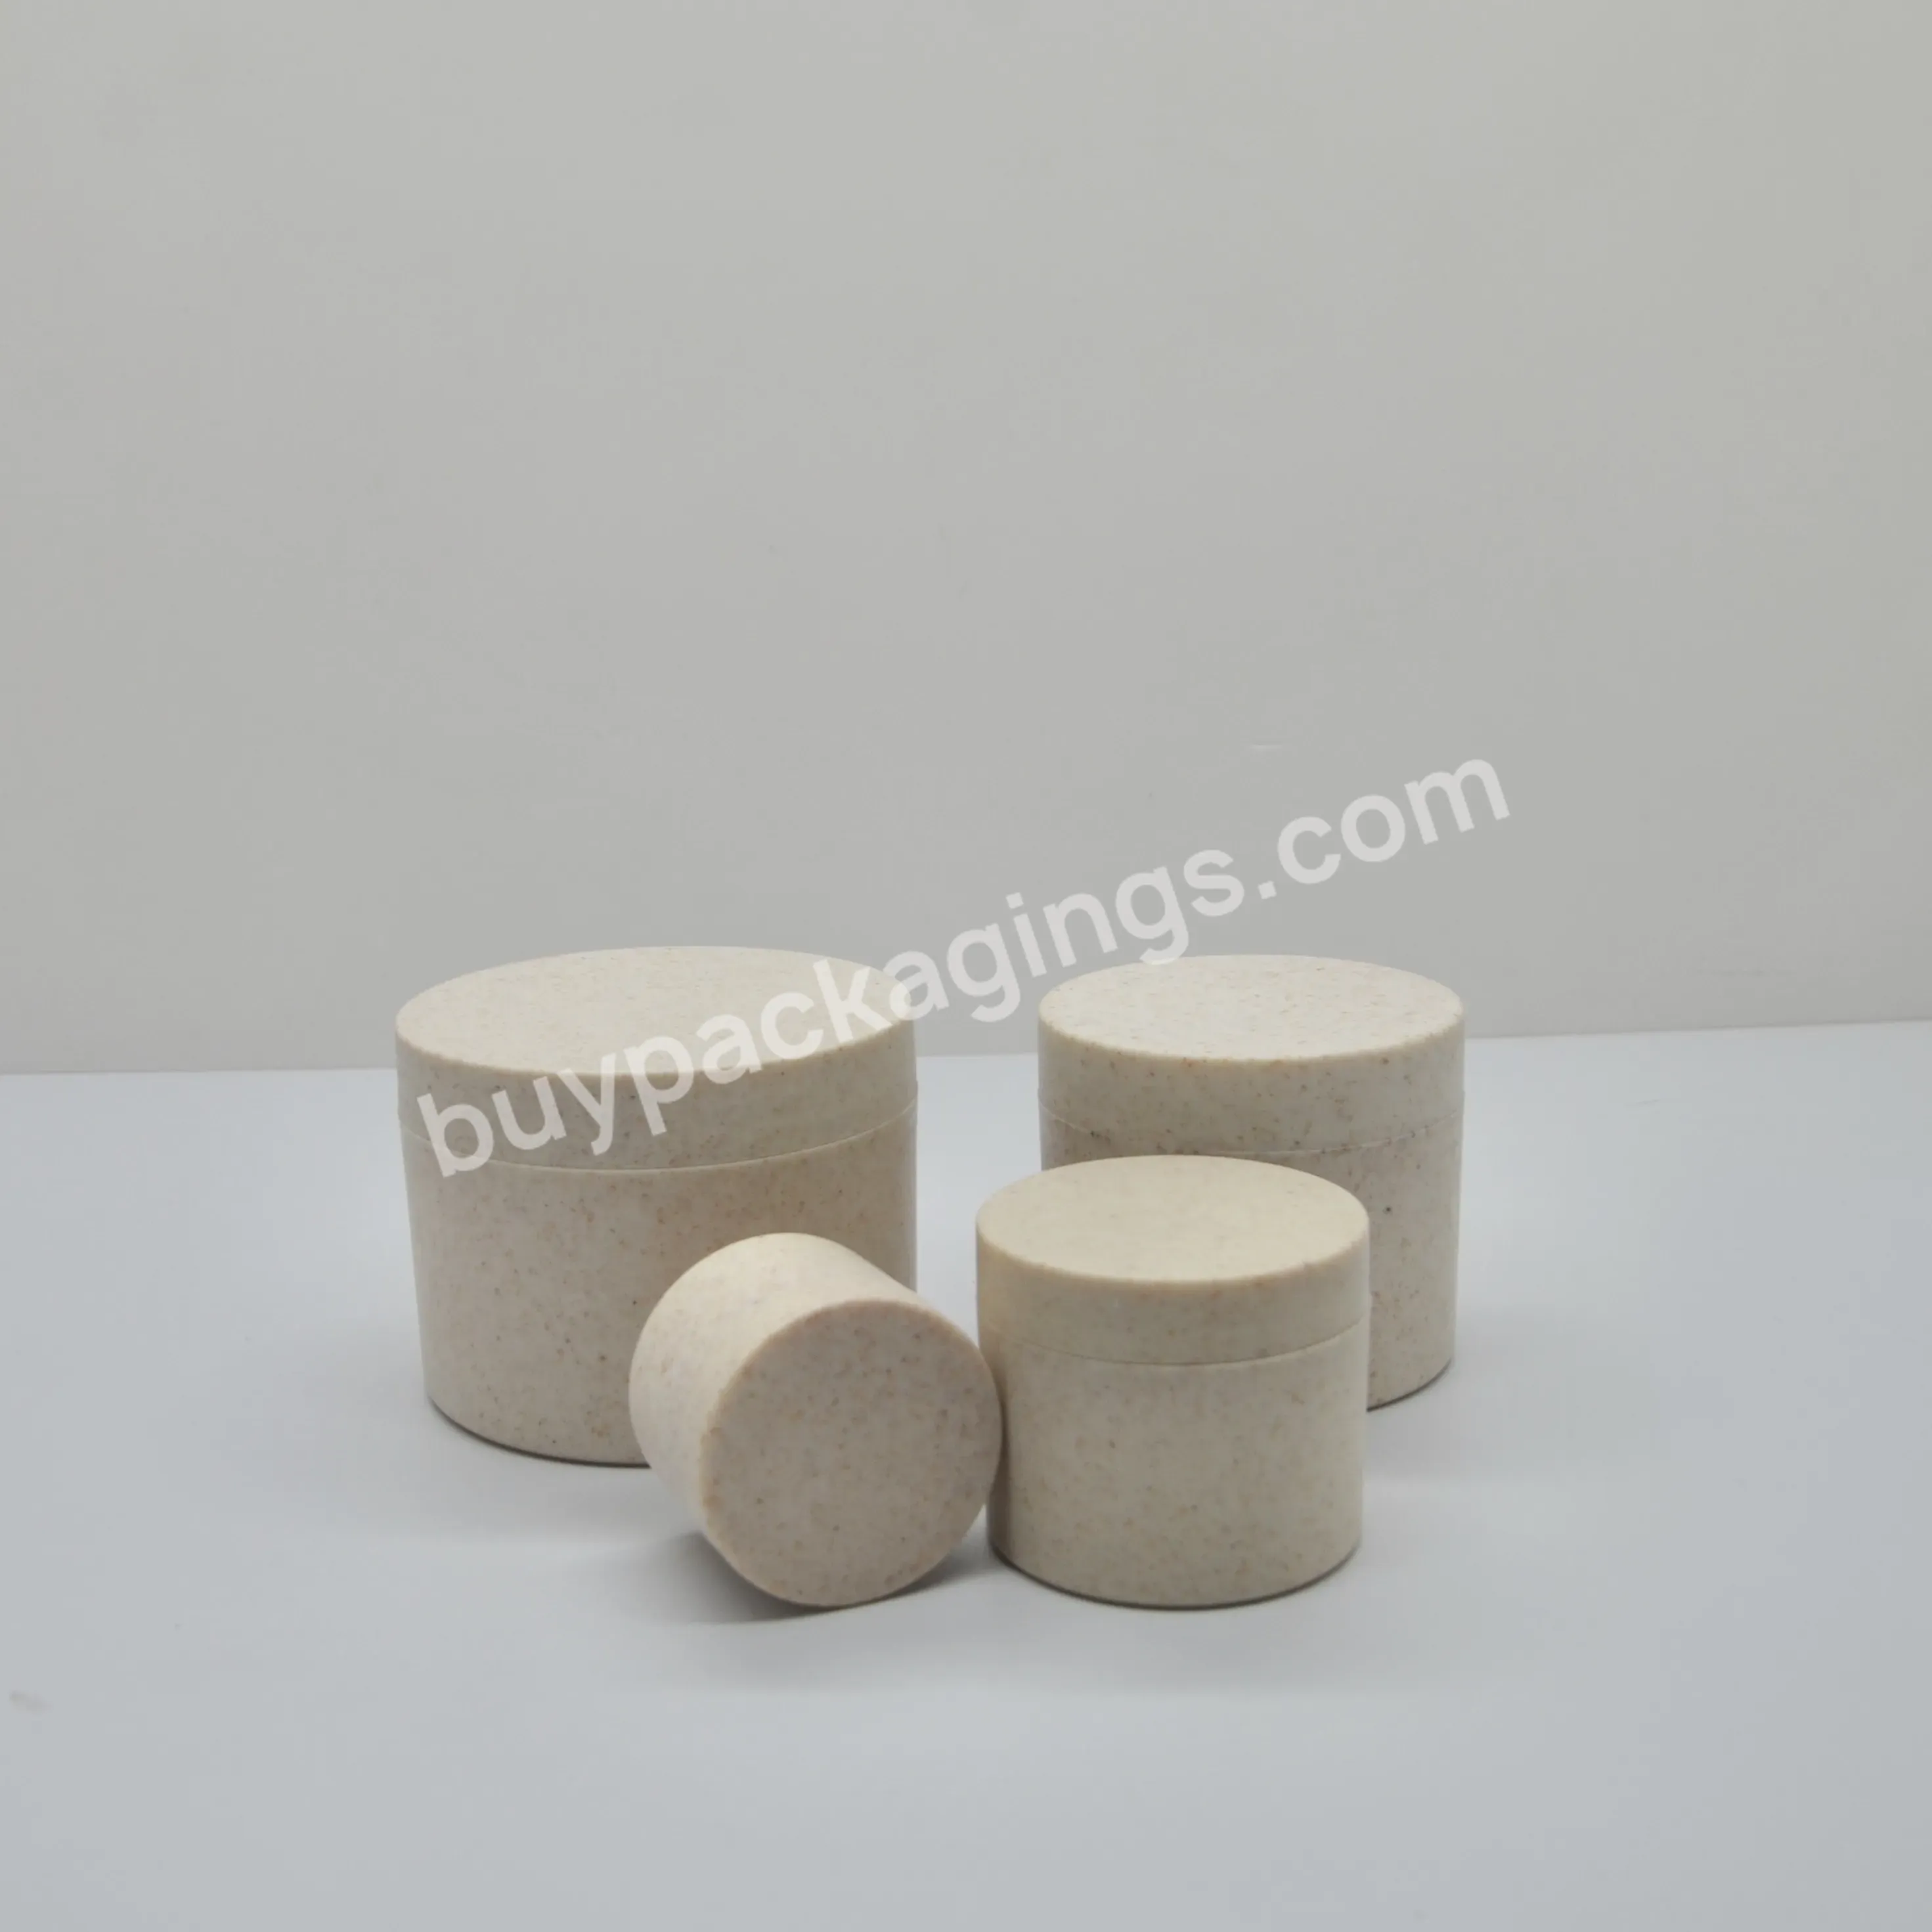 Custom Biodegradable Wheat Straw Jar Eco Friendly Cosmetic Packaging Containers Empty Cream Jar - Buy Biodegradable Cosmetic Containers,Wheat Straw Biodegradable Compostabl Eco Friendly Cosmetic Packaging Containers Cream Jar,Empty Cream Jar.